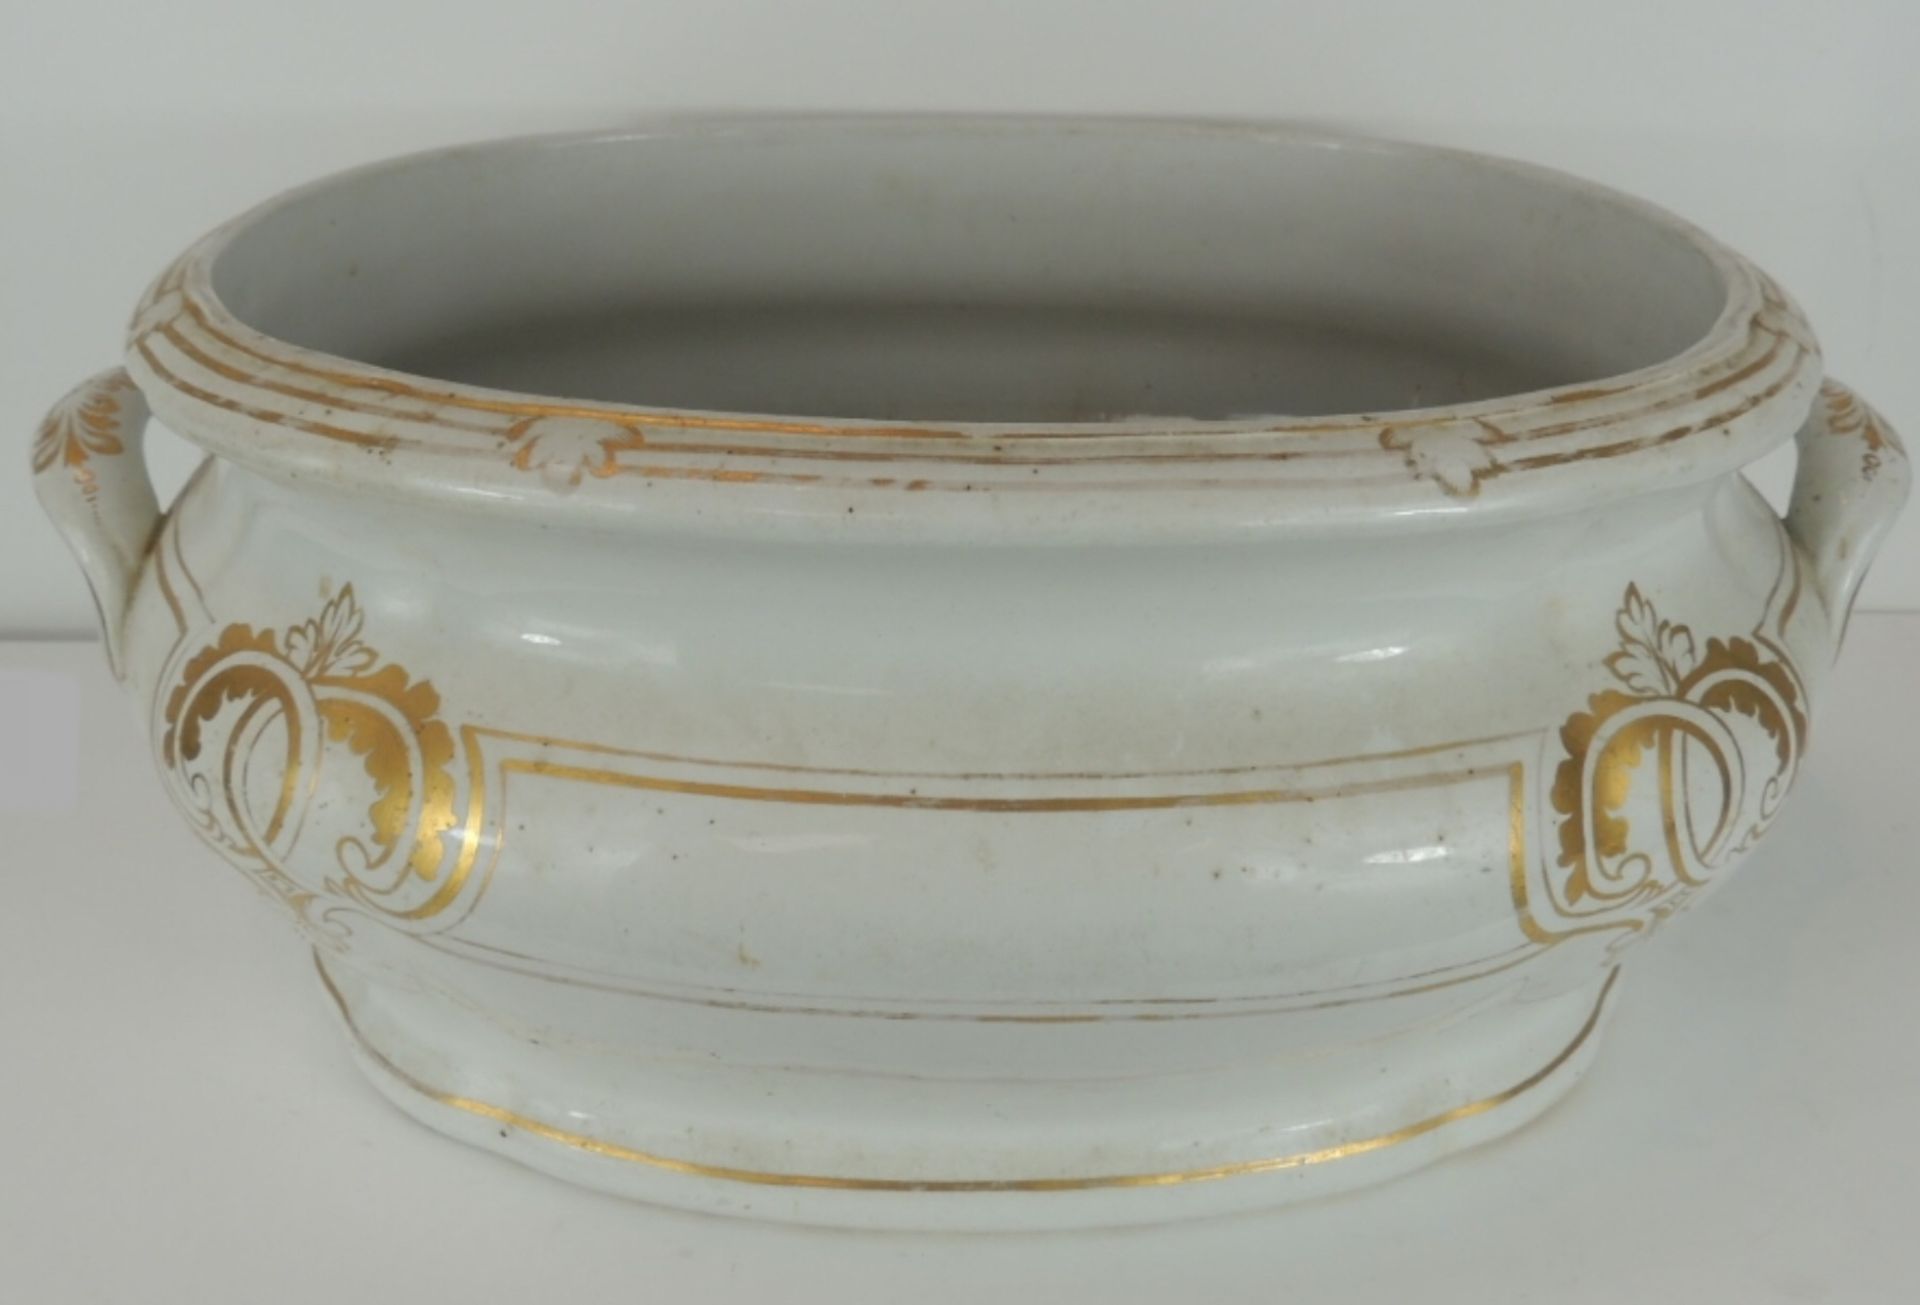 C19th white and gilt pottery foot bath